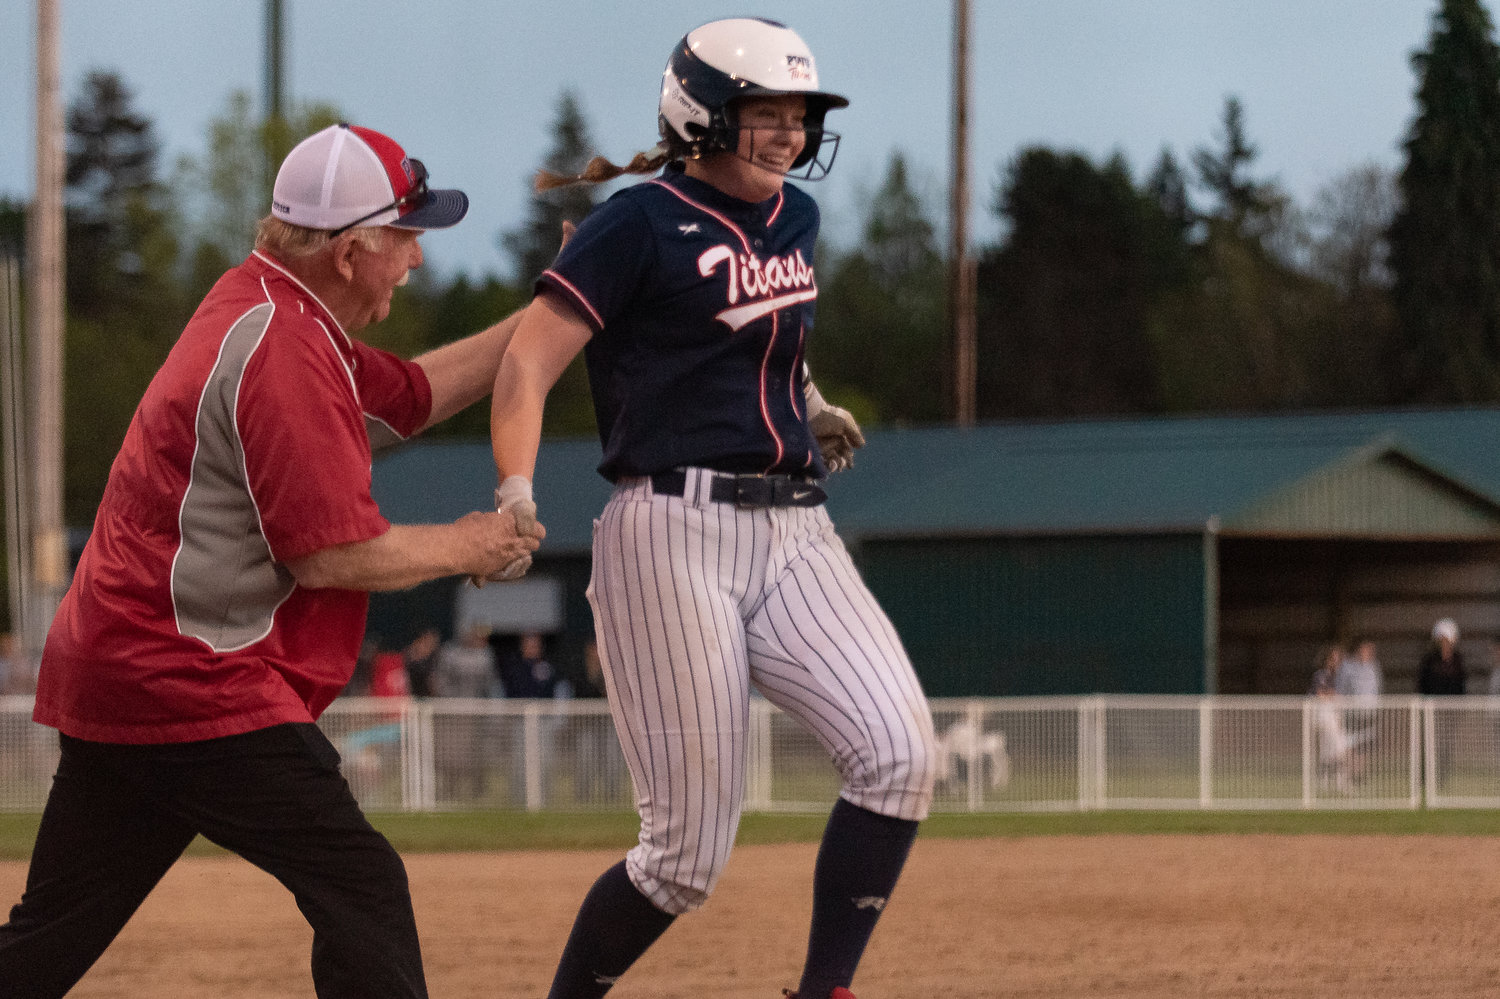 PWV pitcher Olivia Matlock runs to home plate while high-fiving coach Ken Olson after a home run against Adna in the 2B District 4 softball championship game at Fort Borst Park in Centralia May 21.